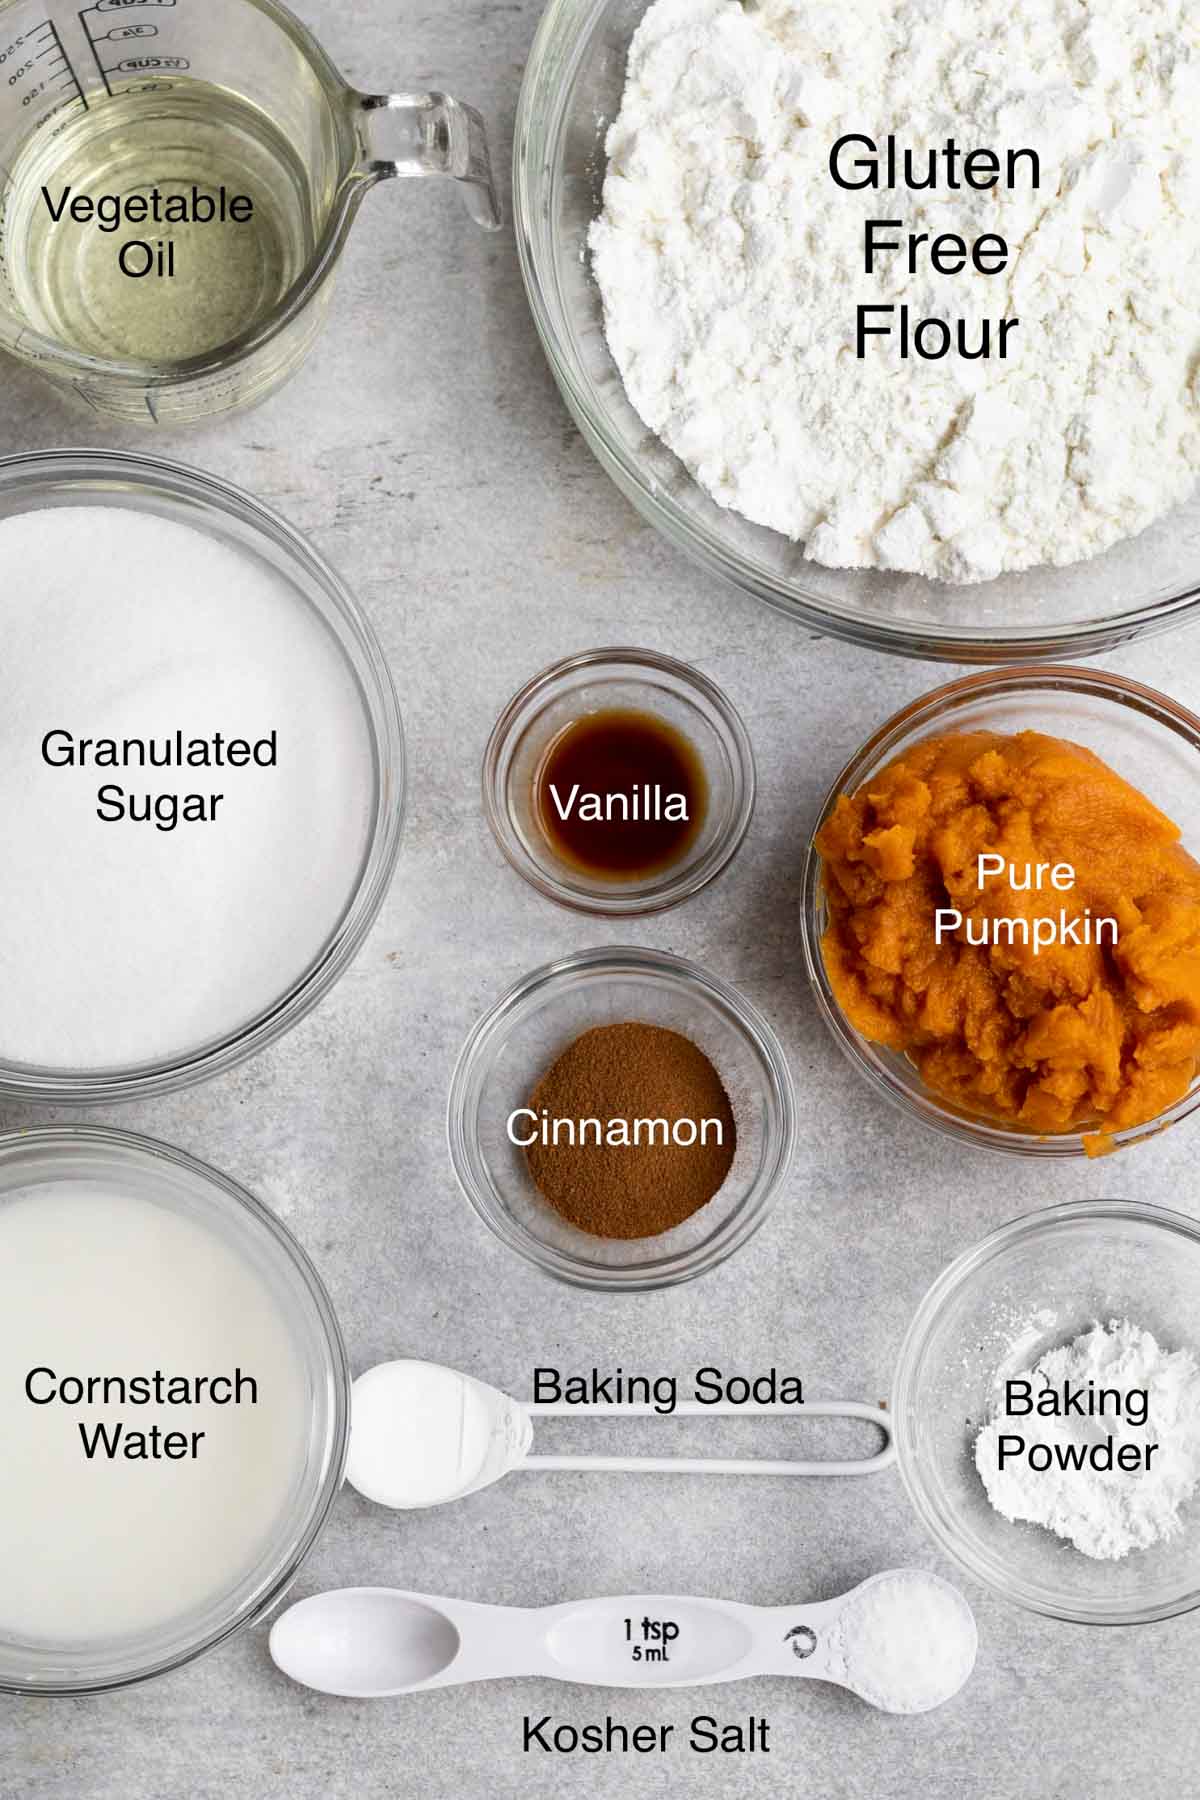 The ingredients for the pumpkin bread with their text names overhead.